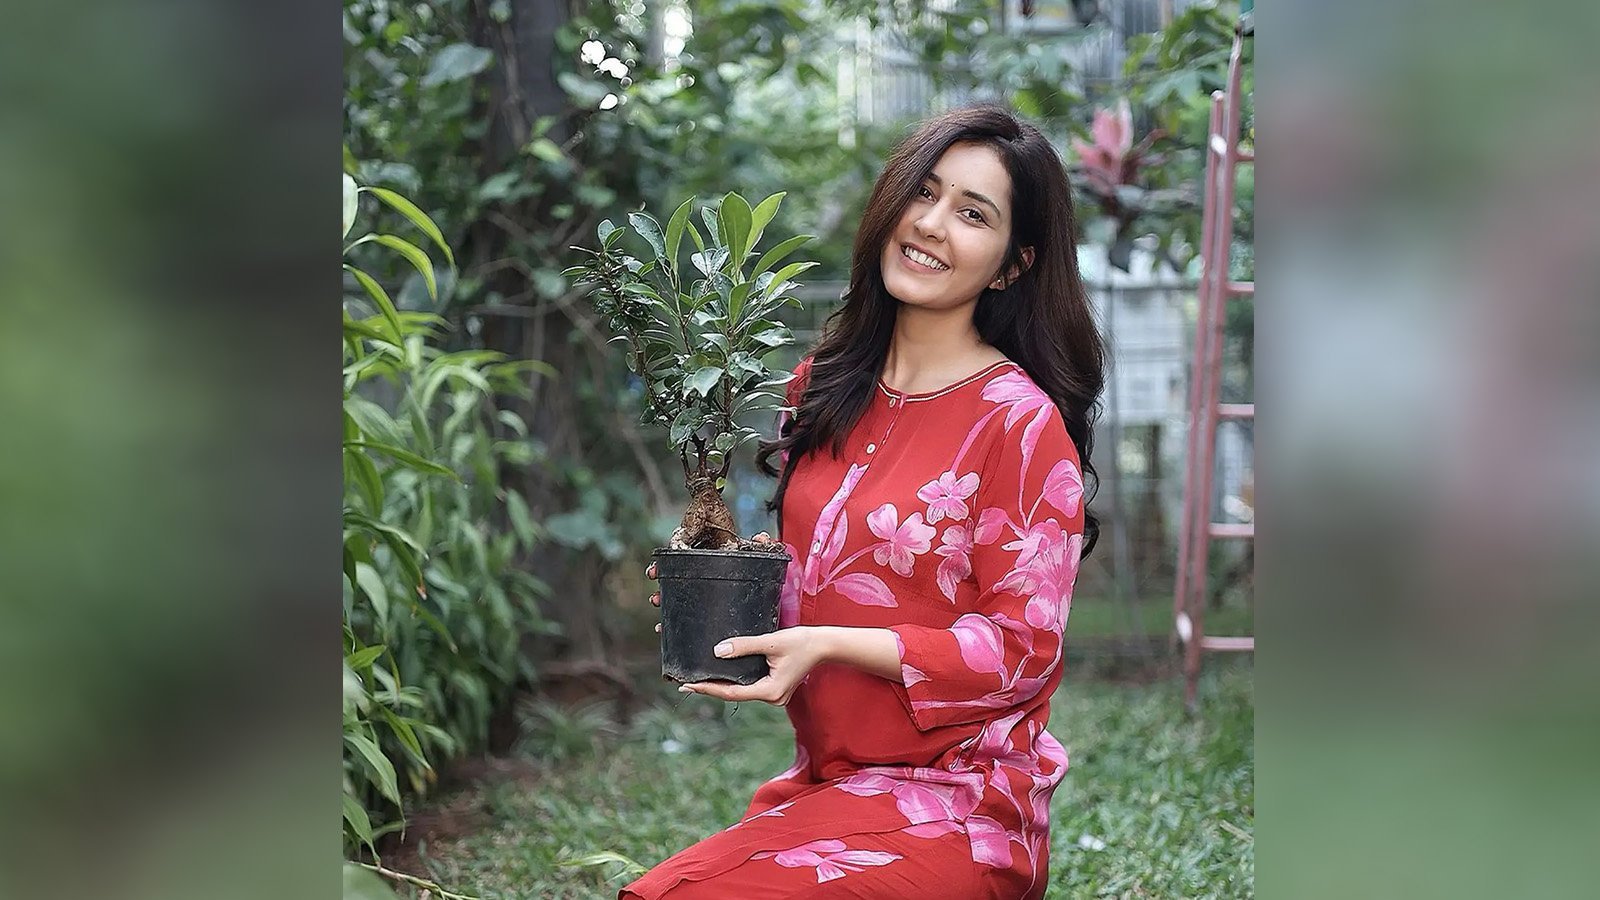 Advocating Green Practices: Raashii Khanna's Annual Birthday Tree-Planting Tradition